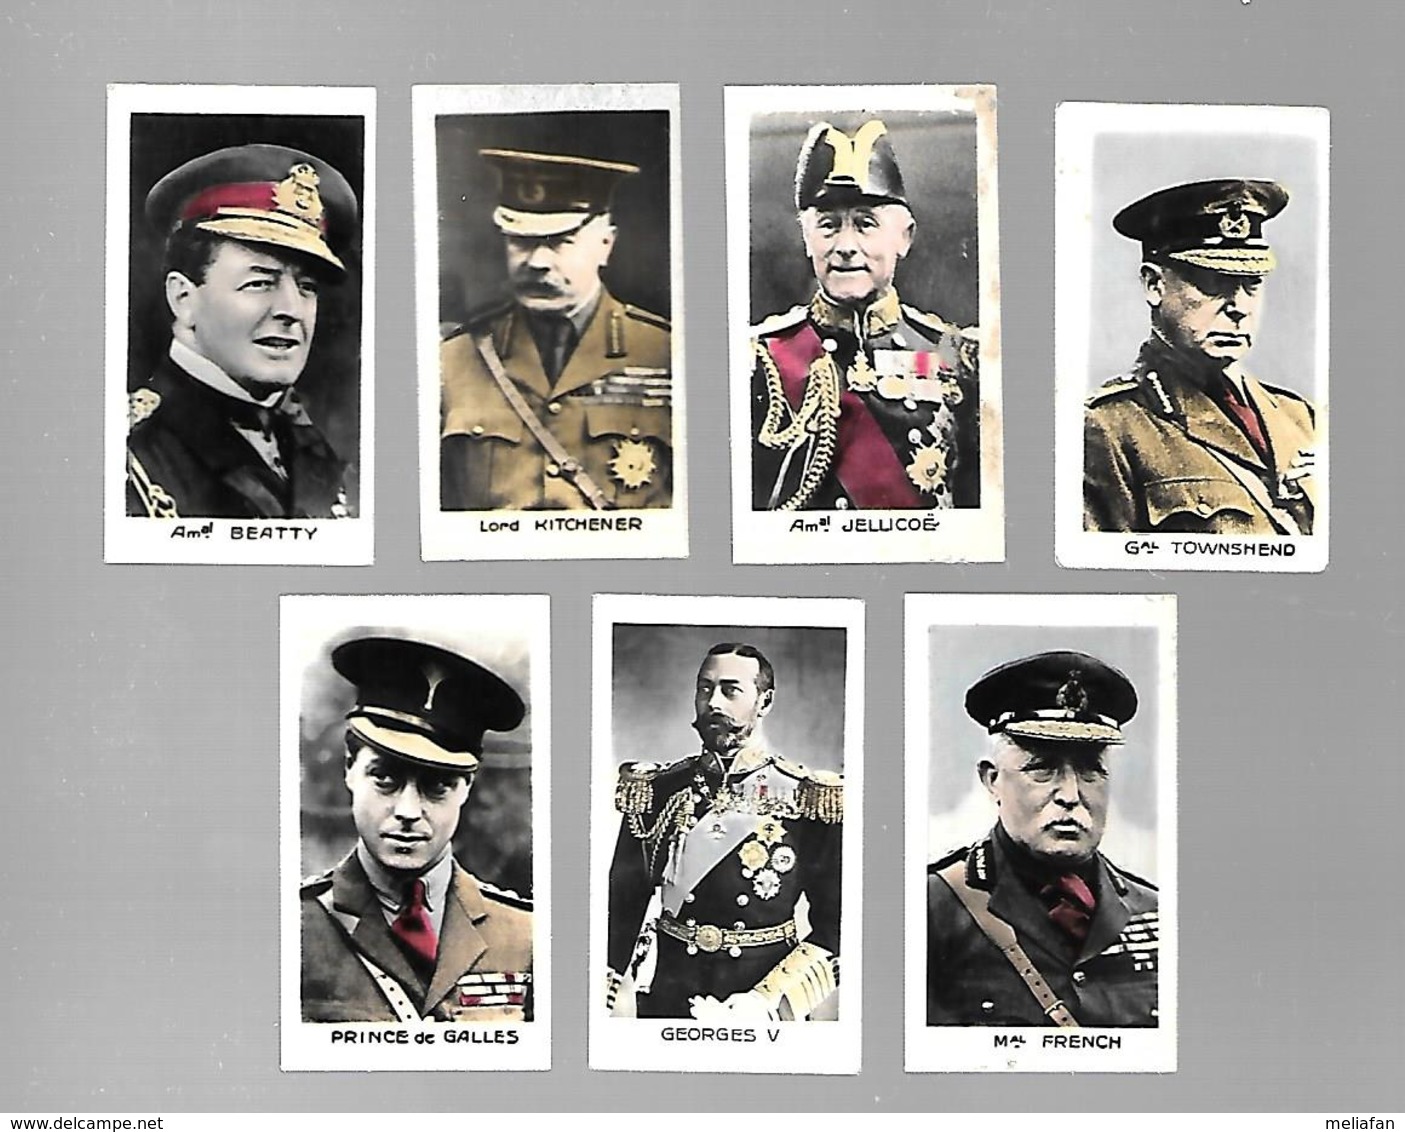 X913 - KREMA CARDS - JELLICOE - FRENCH - KITCHENER - BEATTY - TOWSHEND - PRINCE DE GALLES GEORGES V - 1914-18